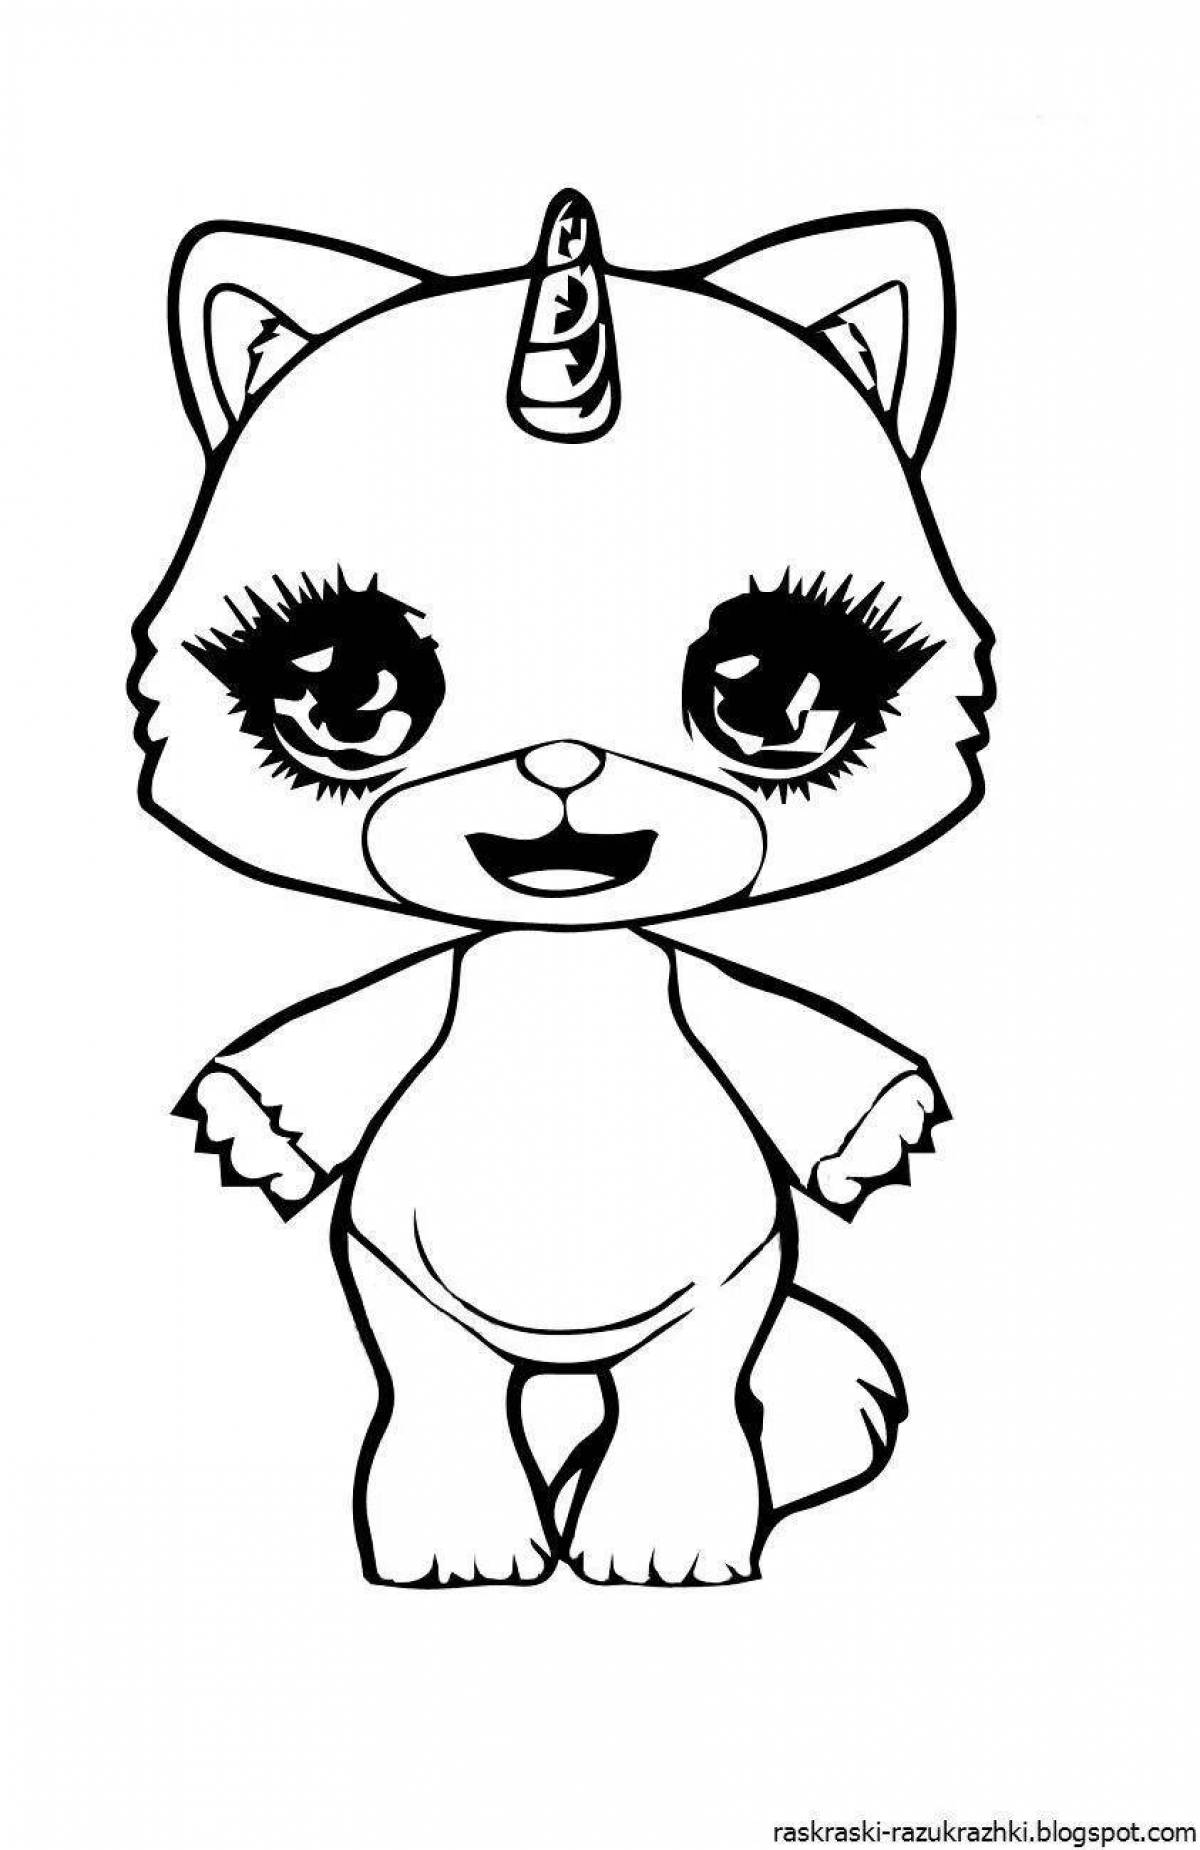 Puppy chase coloring page